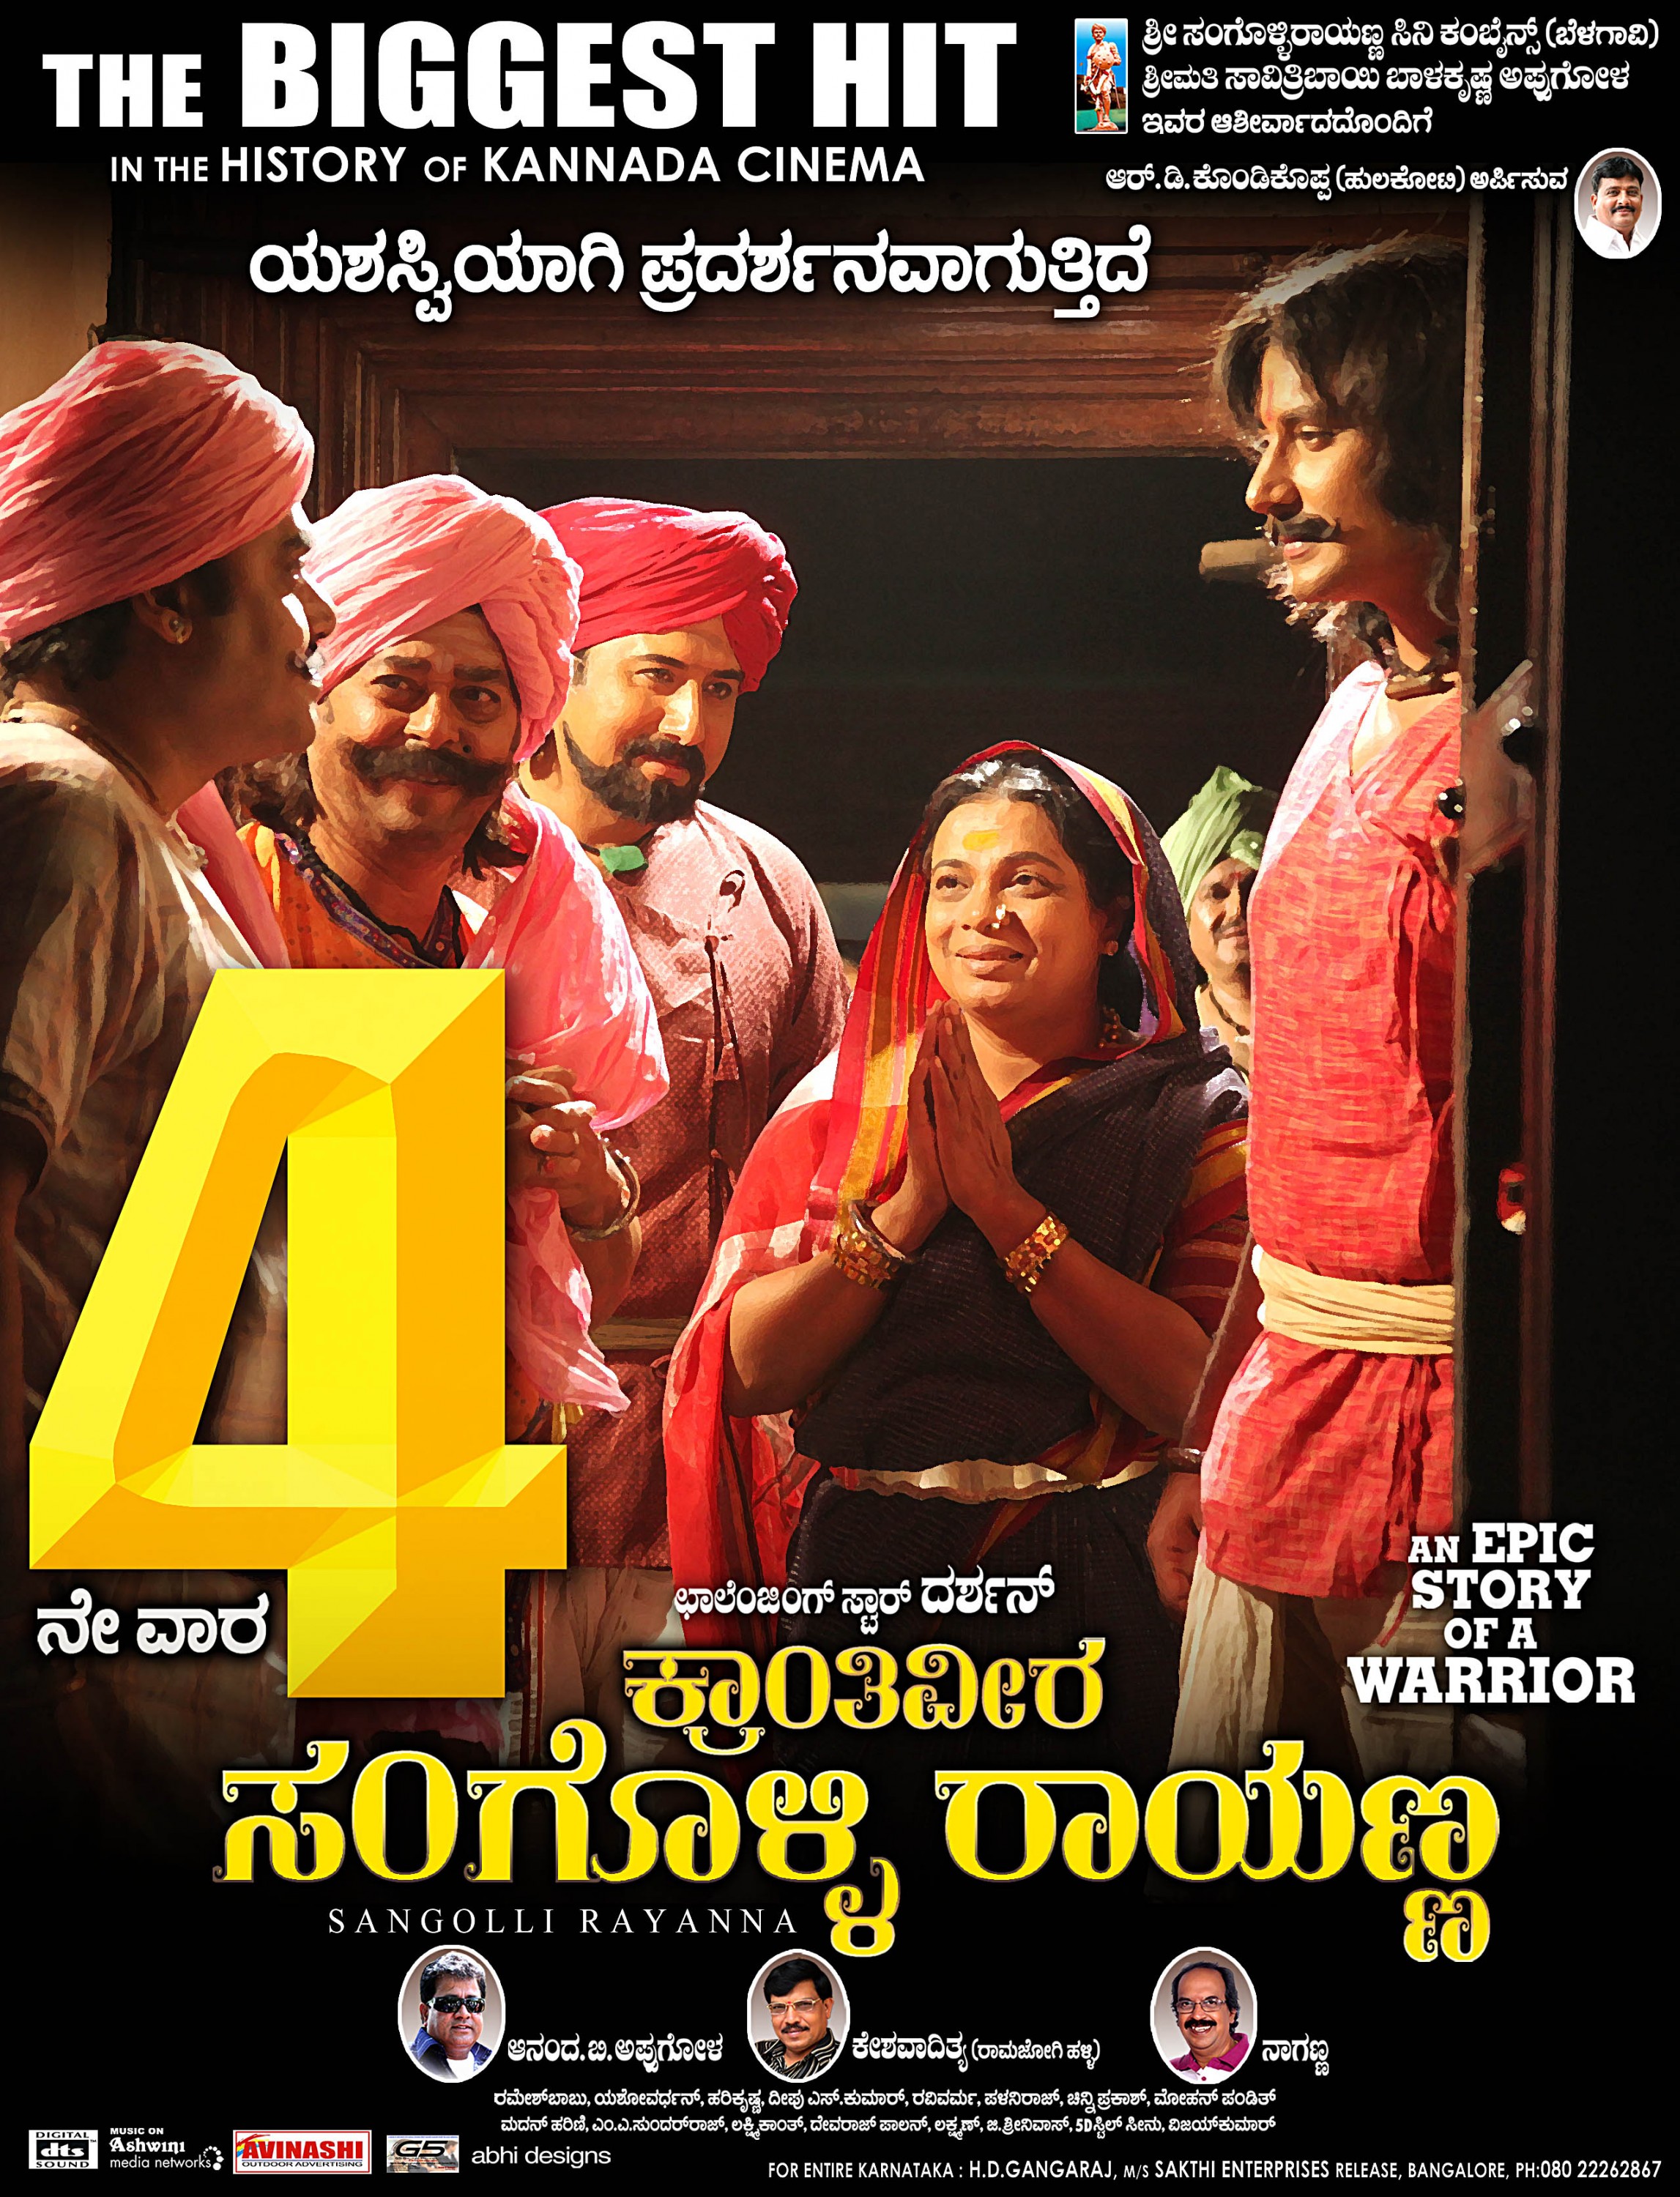 Mega Sized Movie Poster Image for Sangolli Rayanna (#63 of 79)